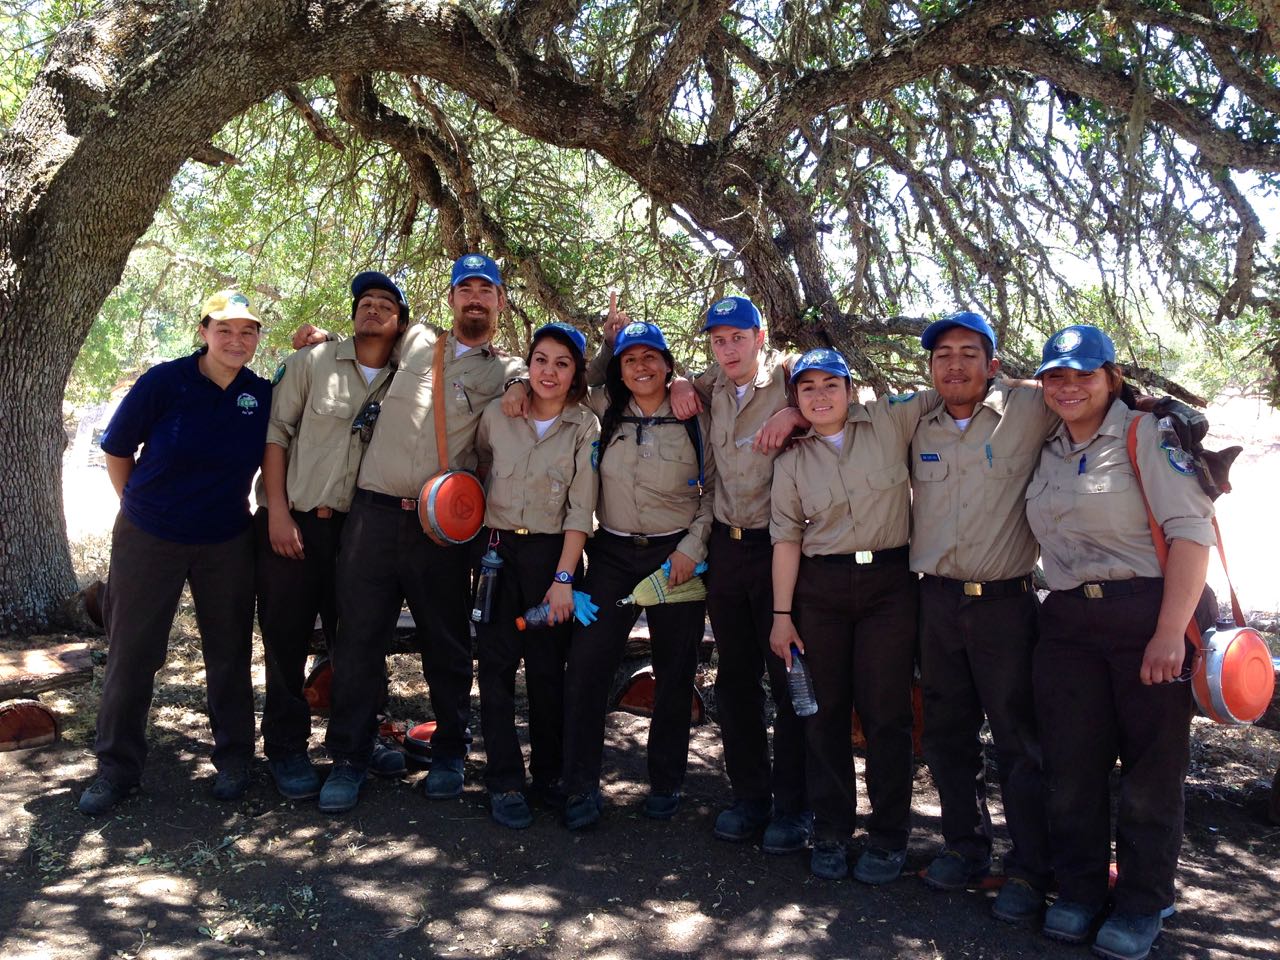 Salute to the California Conservation Corps!